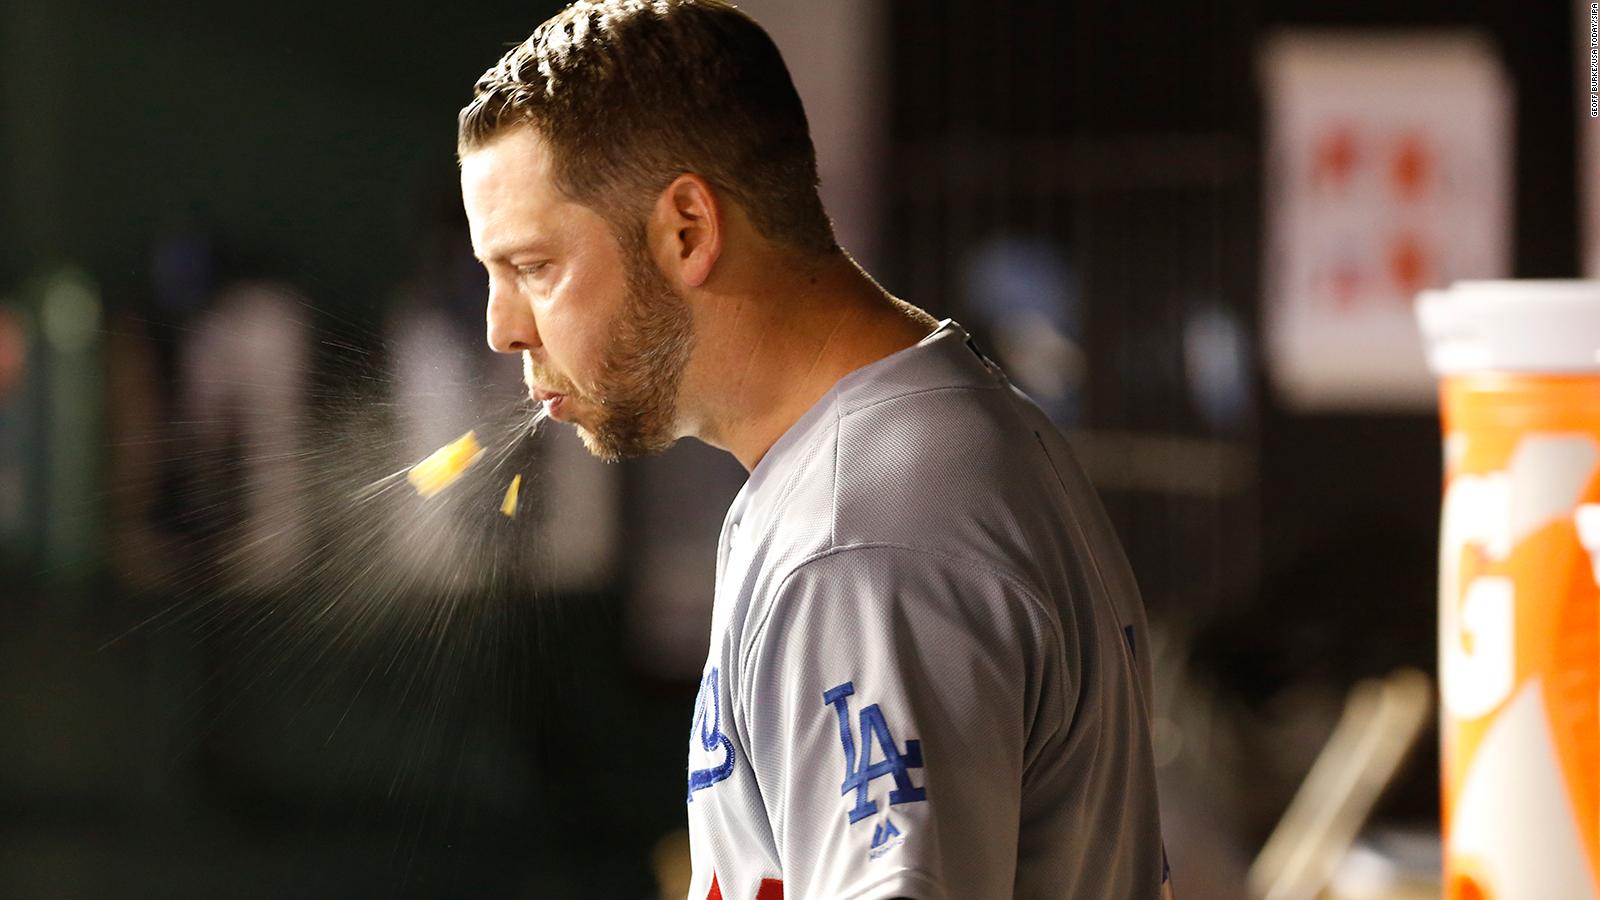 MLB season: Because of Covid-19, there's no more spitting in baseball - CNN